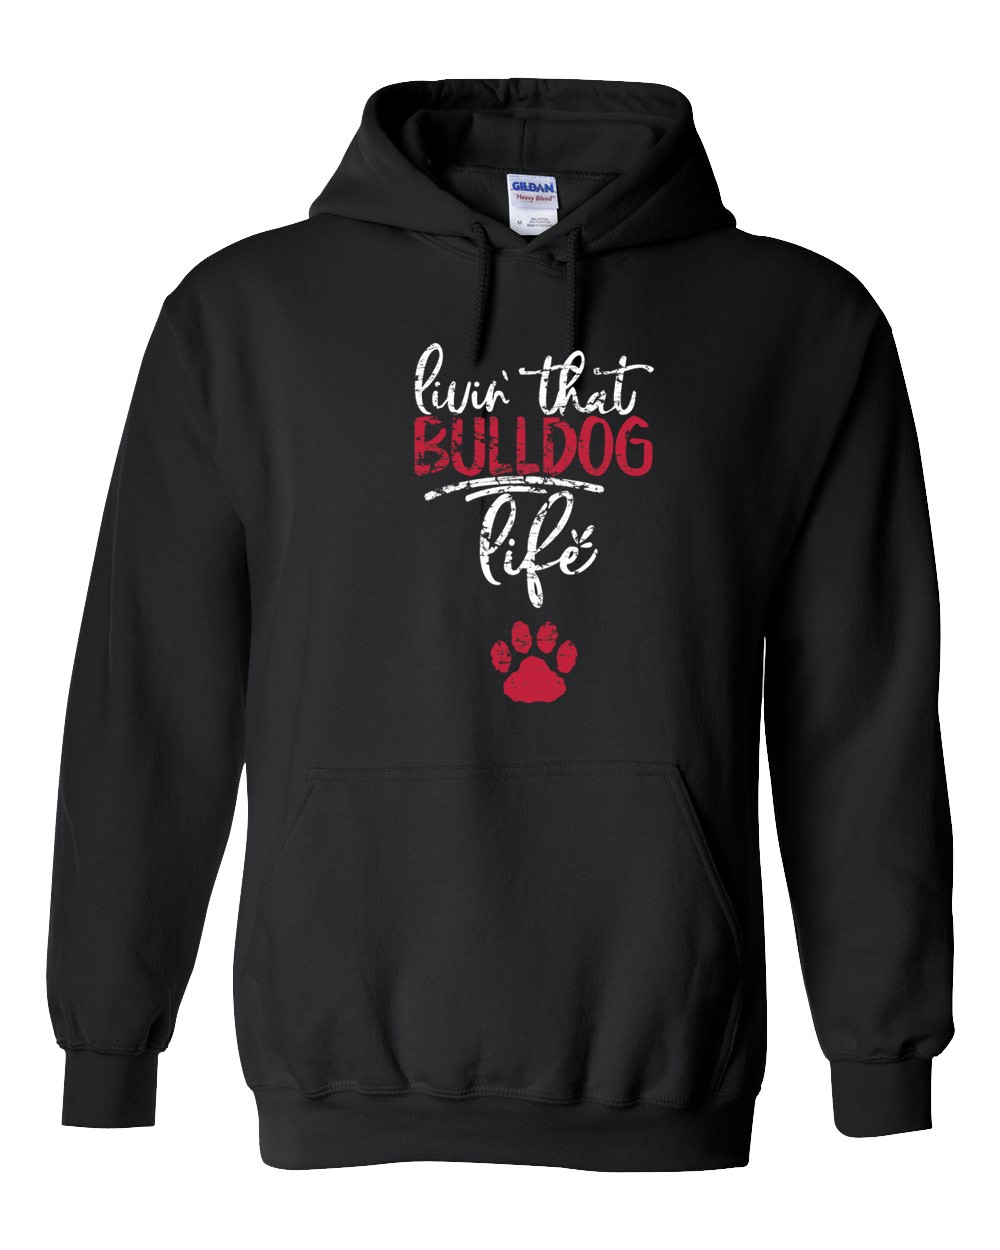 SAS Spirit Wear "Living that Bulldog" Hoodie w/Logo - Please Allow 2-3 Weeks for Delivery